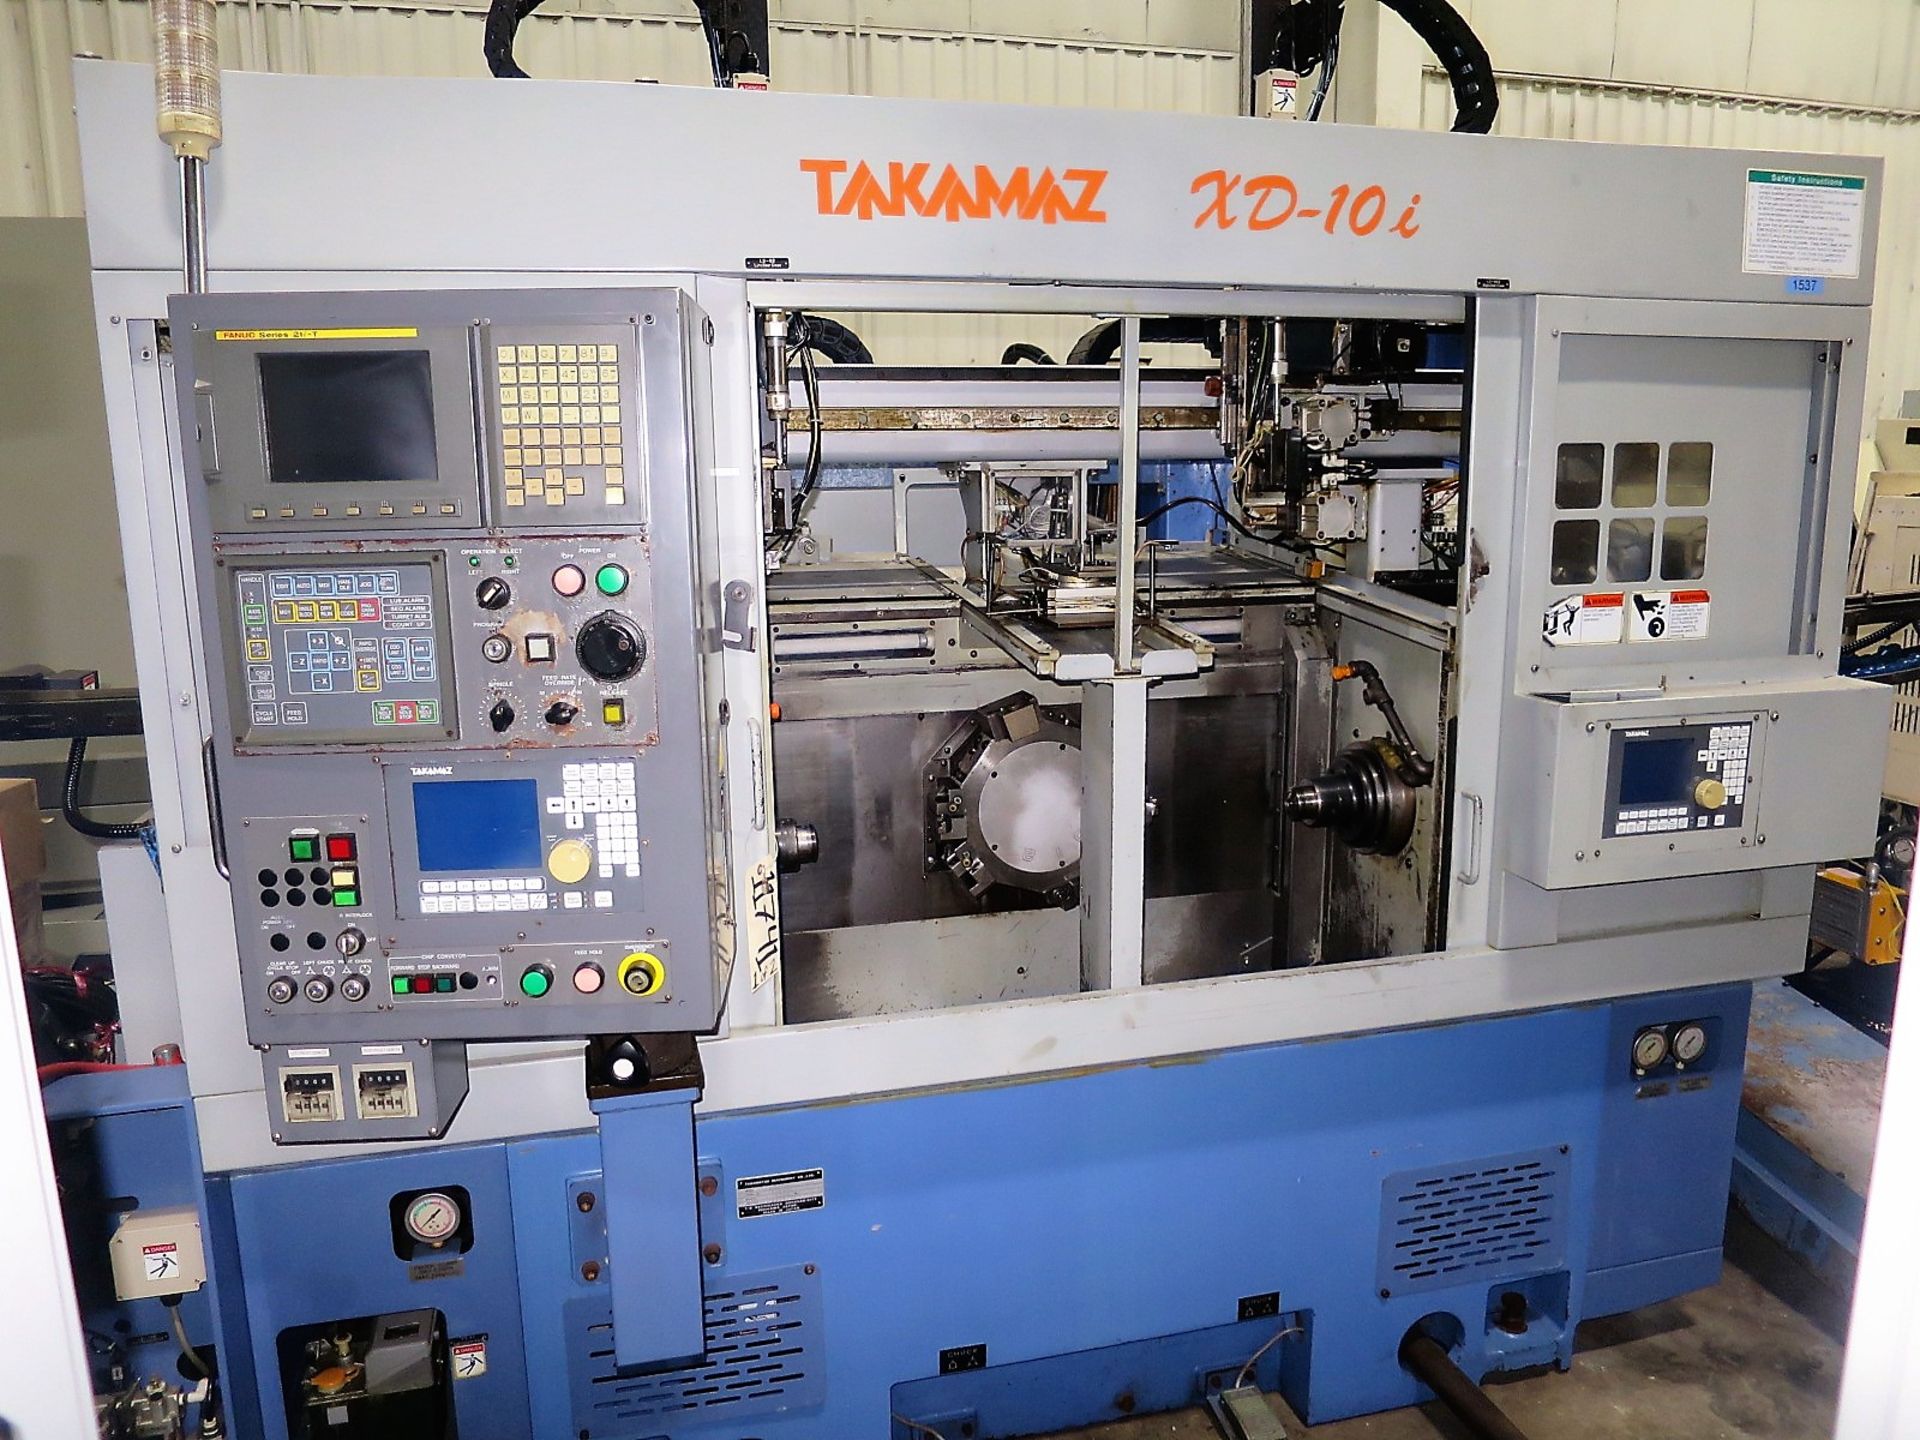 Takamaz XDE-101 CNC Twin Spindle Turning Center w/Gantry Loading System, S/N 300445, New 2006